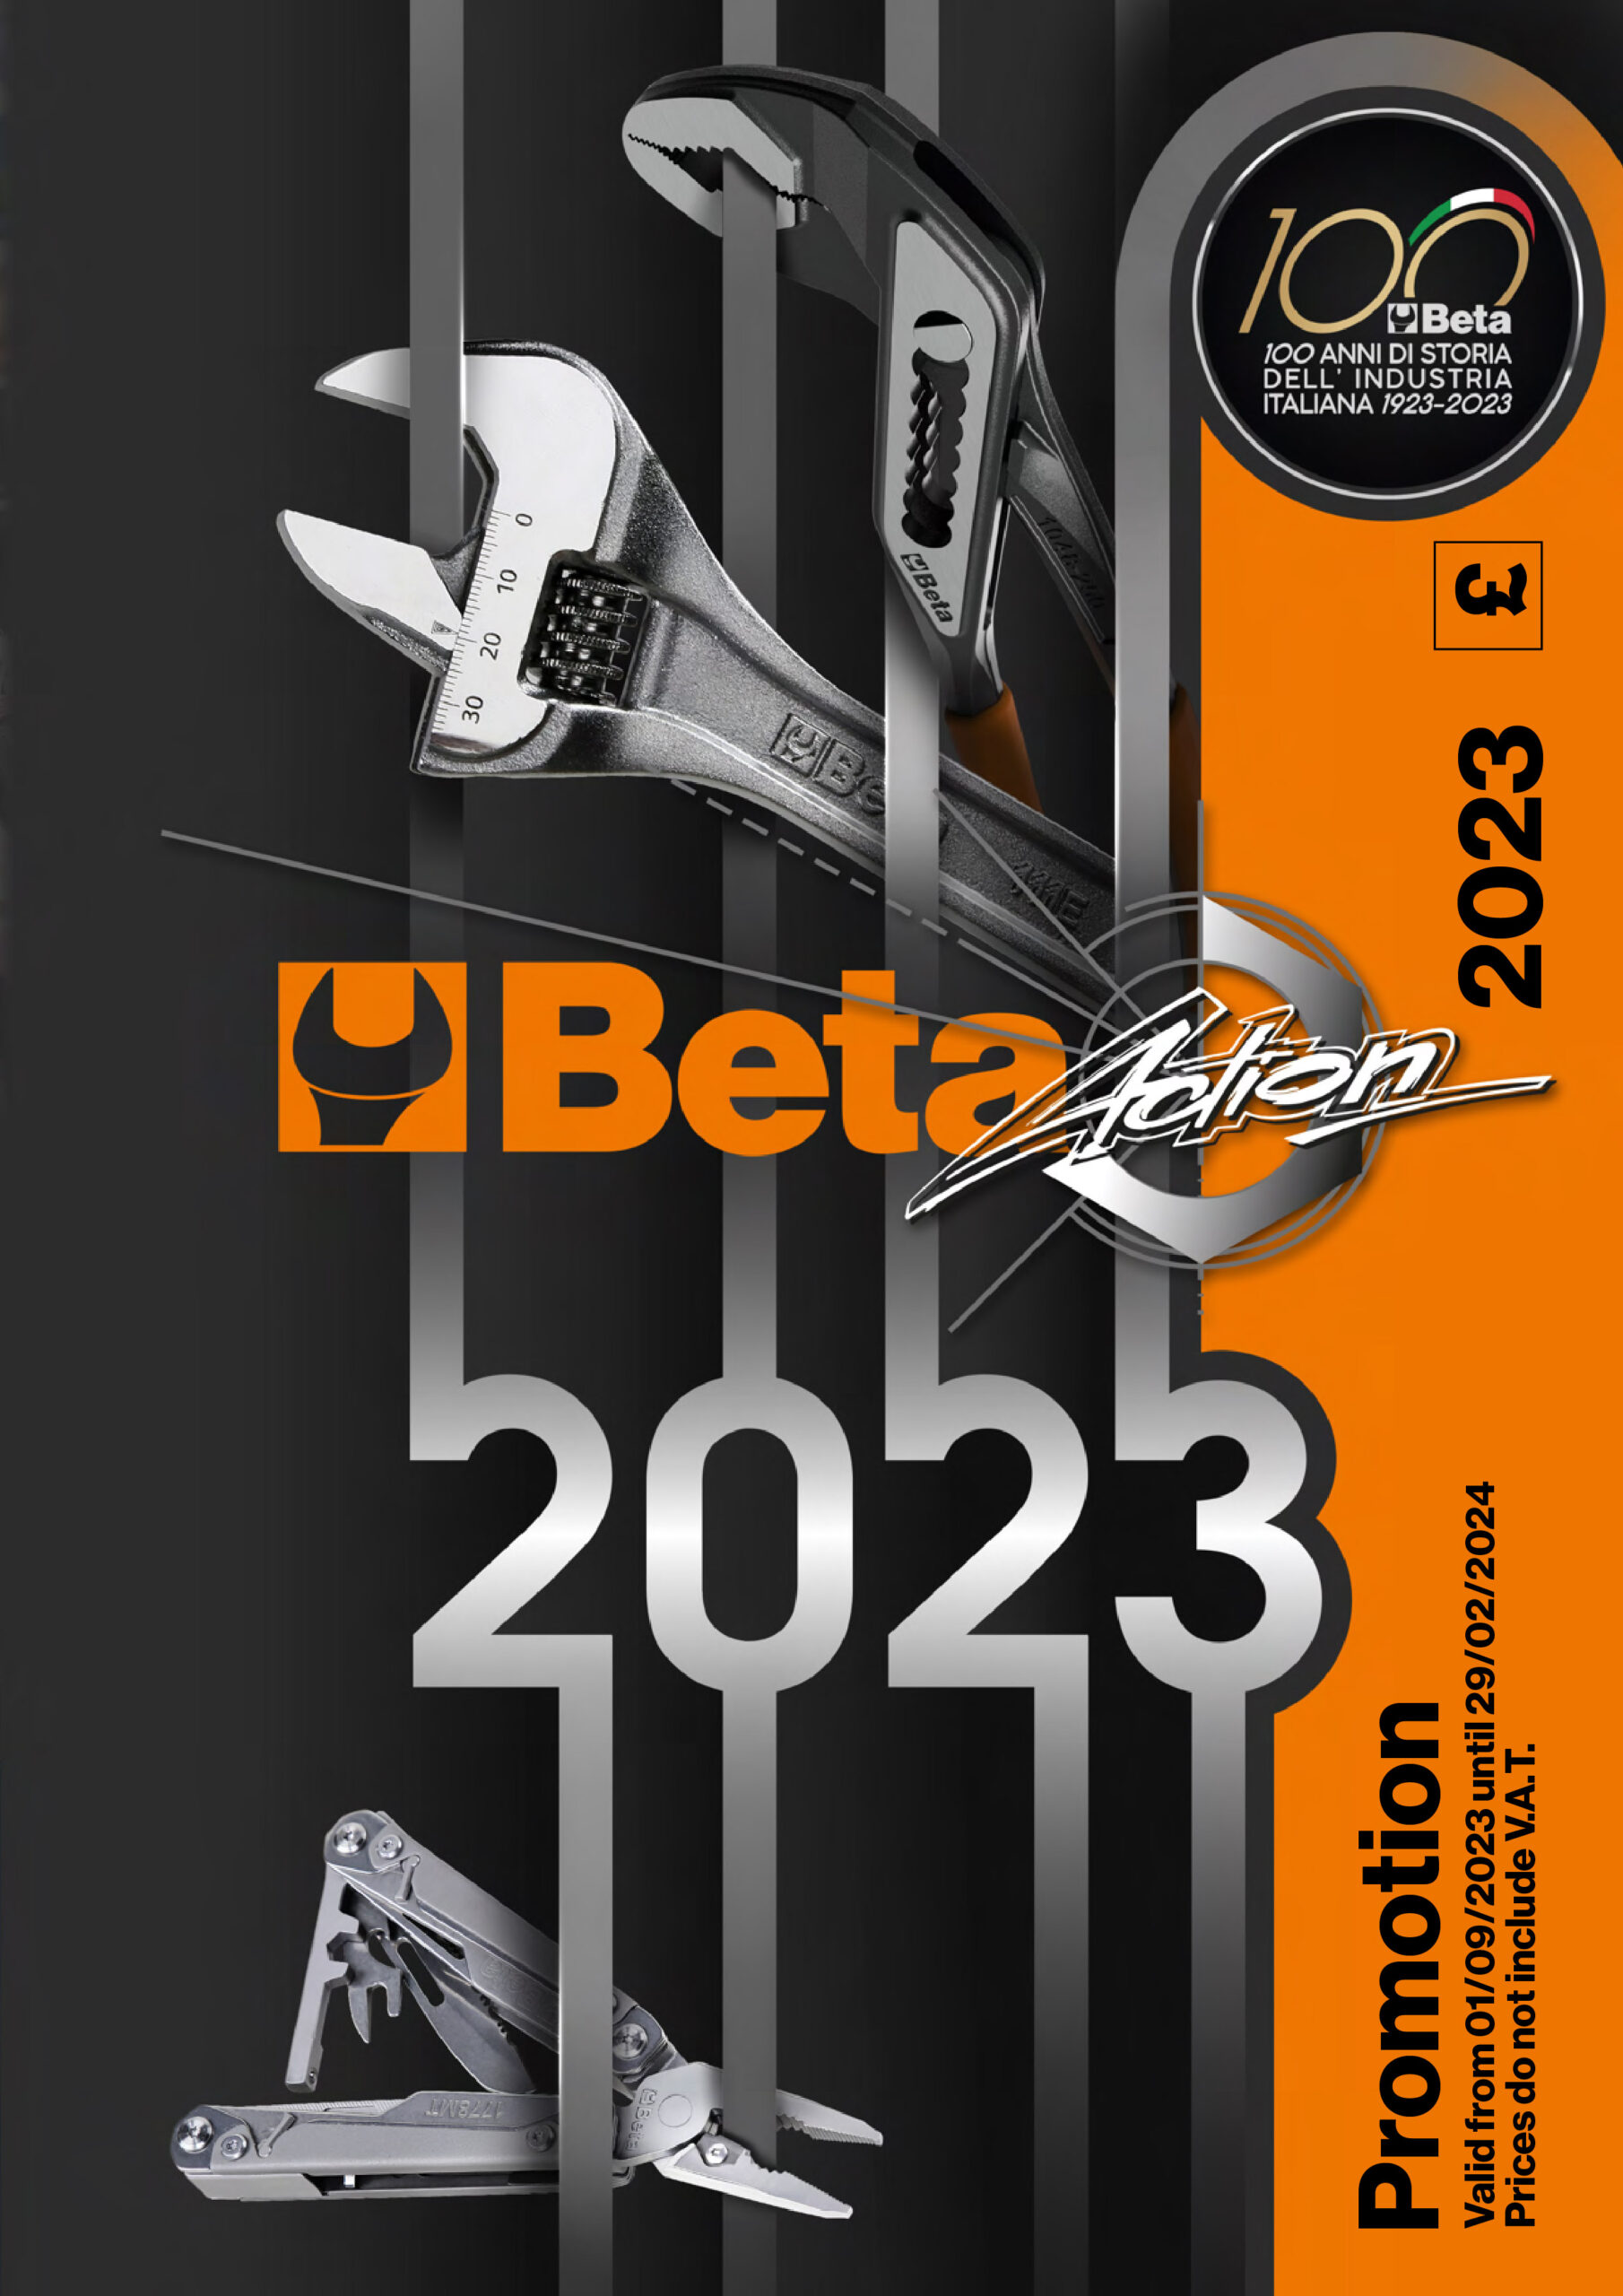 Beta Action Promotion September 2023 - February 2024 download image